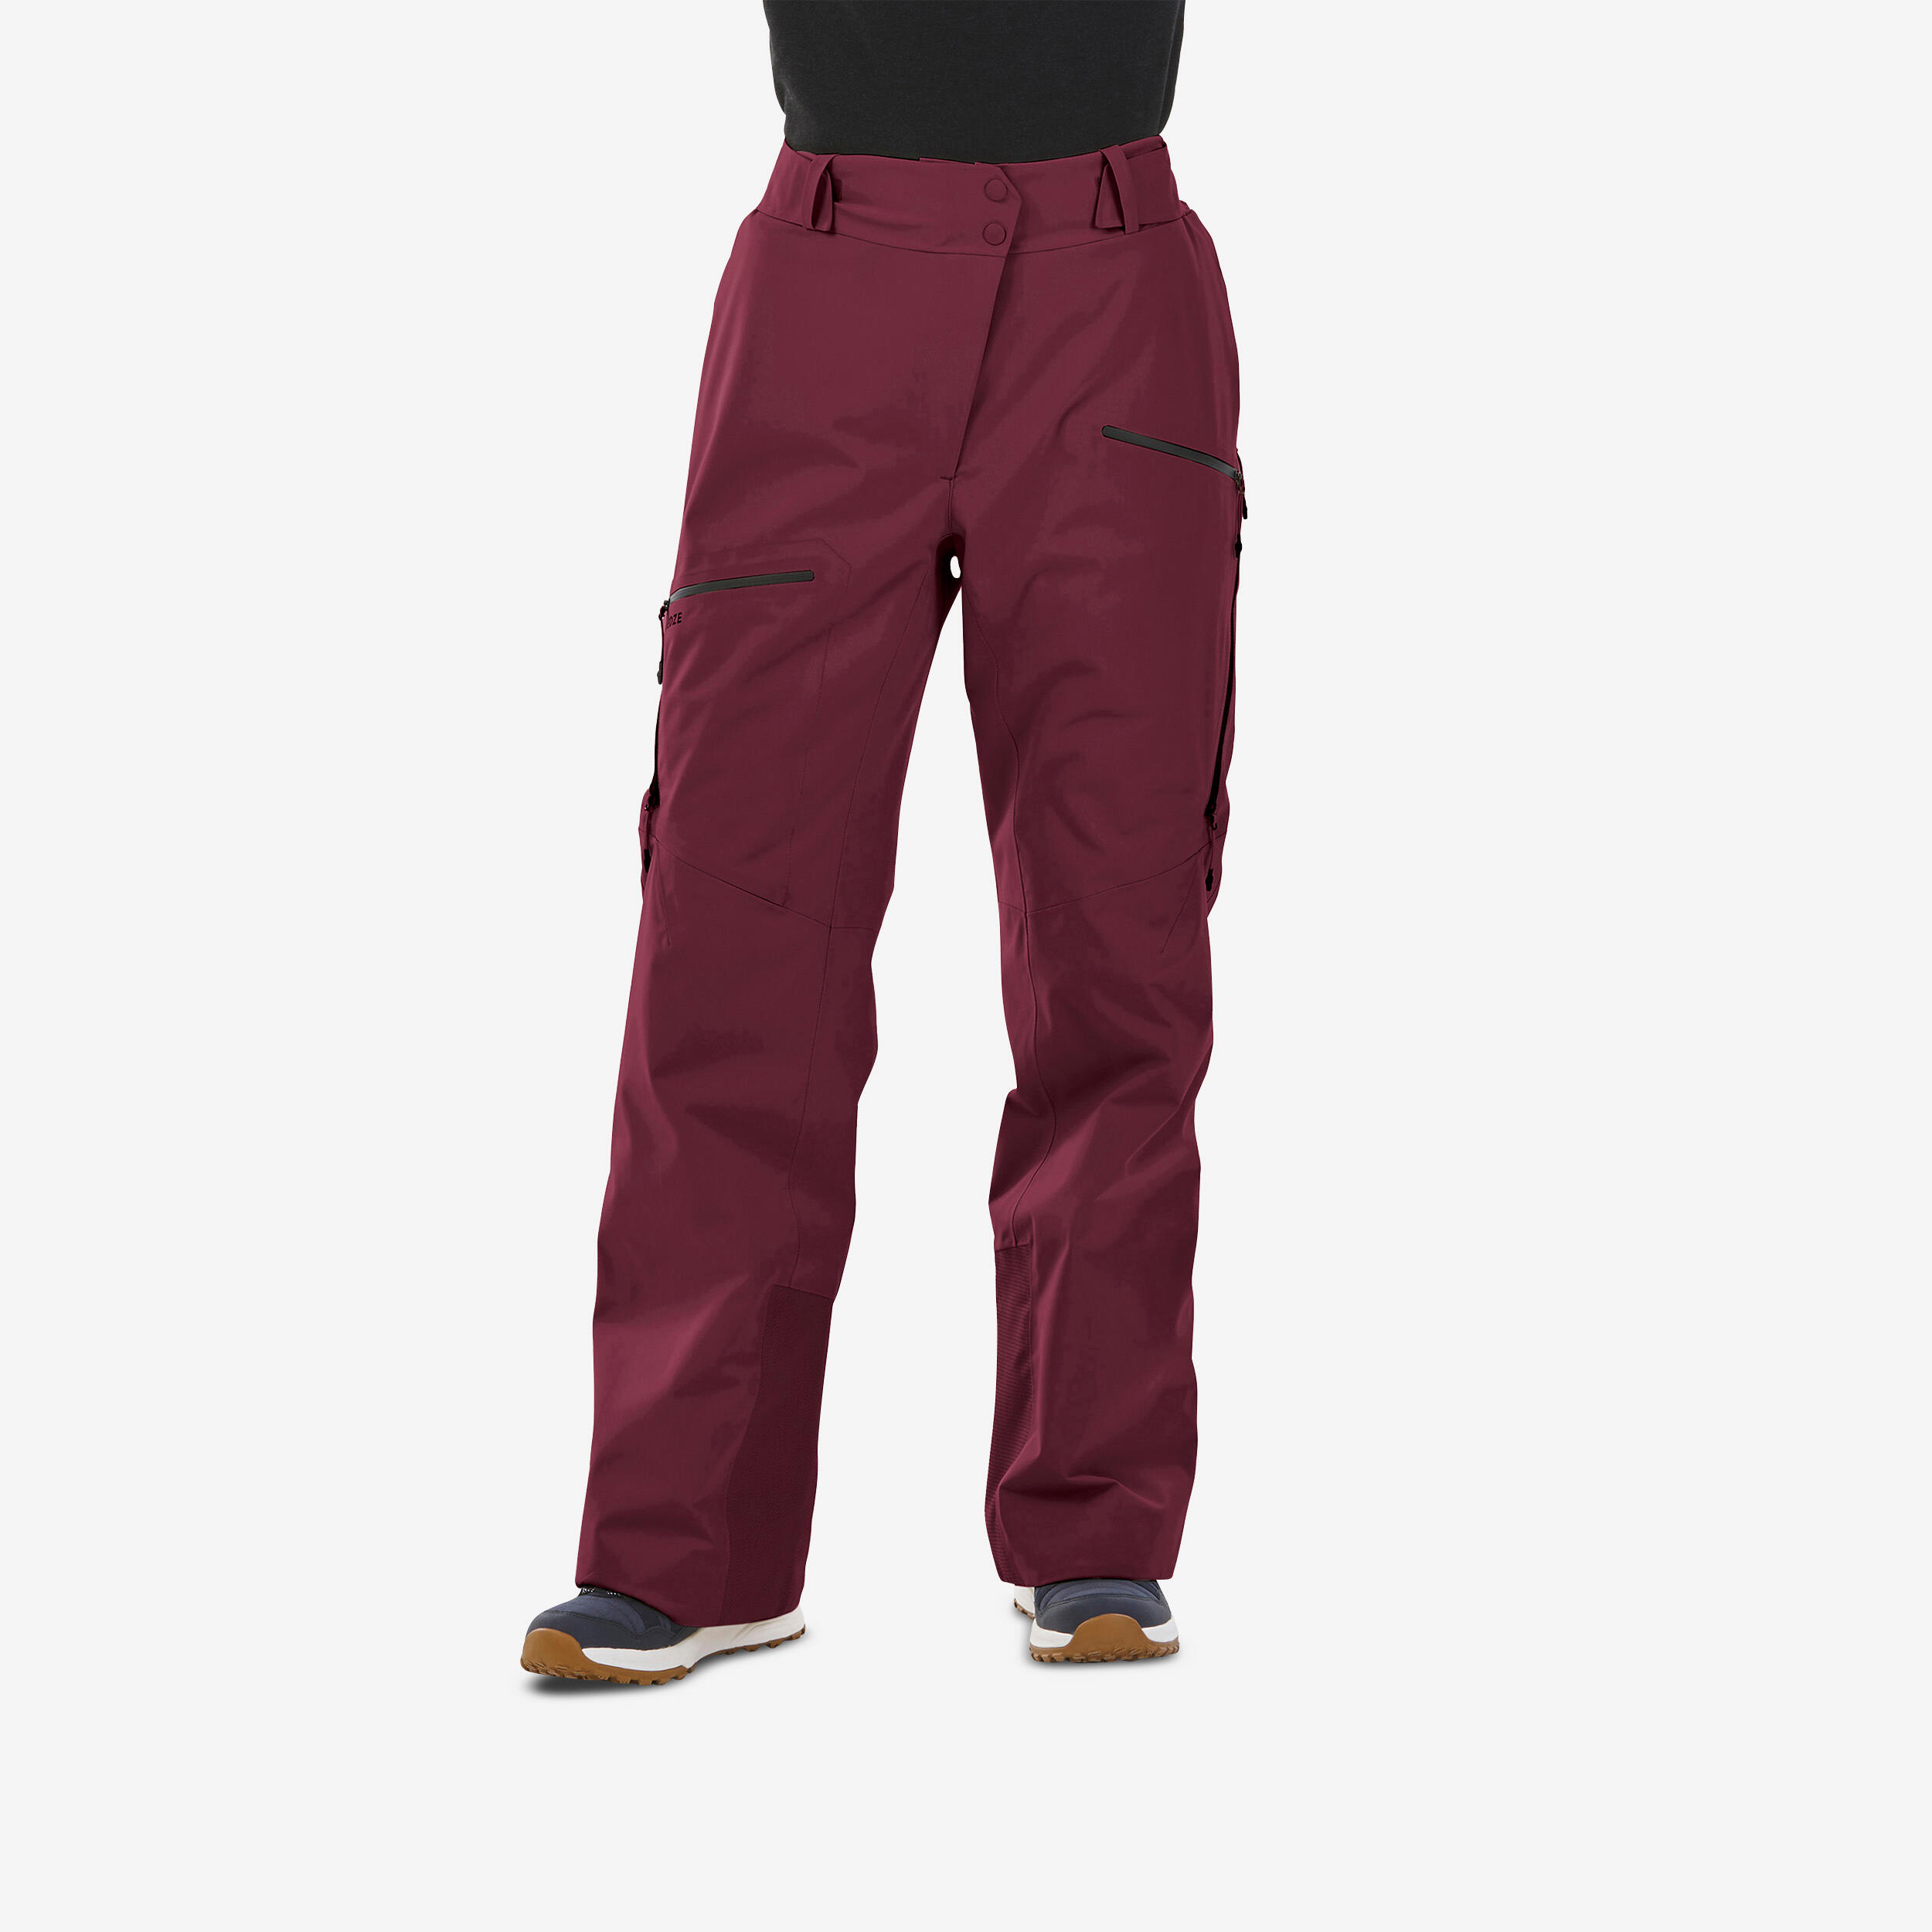 Women Thermal Pant for Skiing - BL100 Black